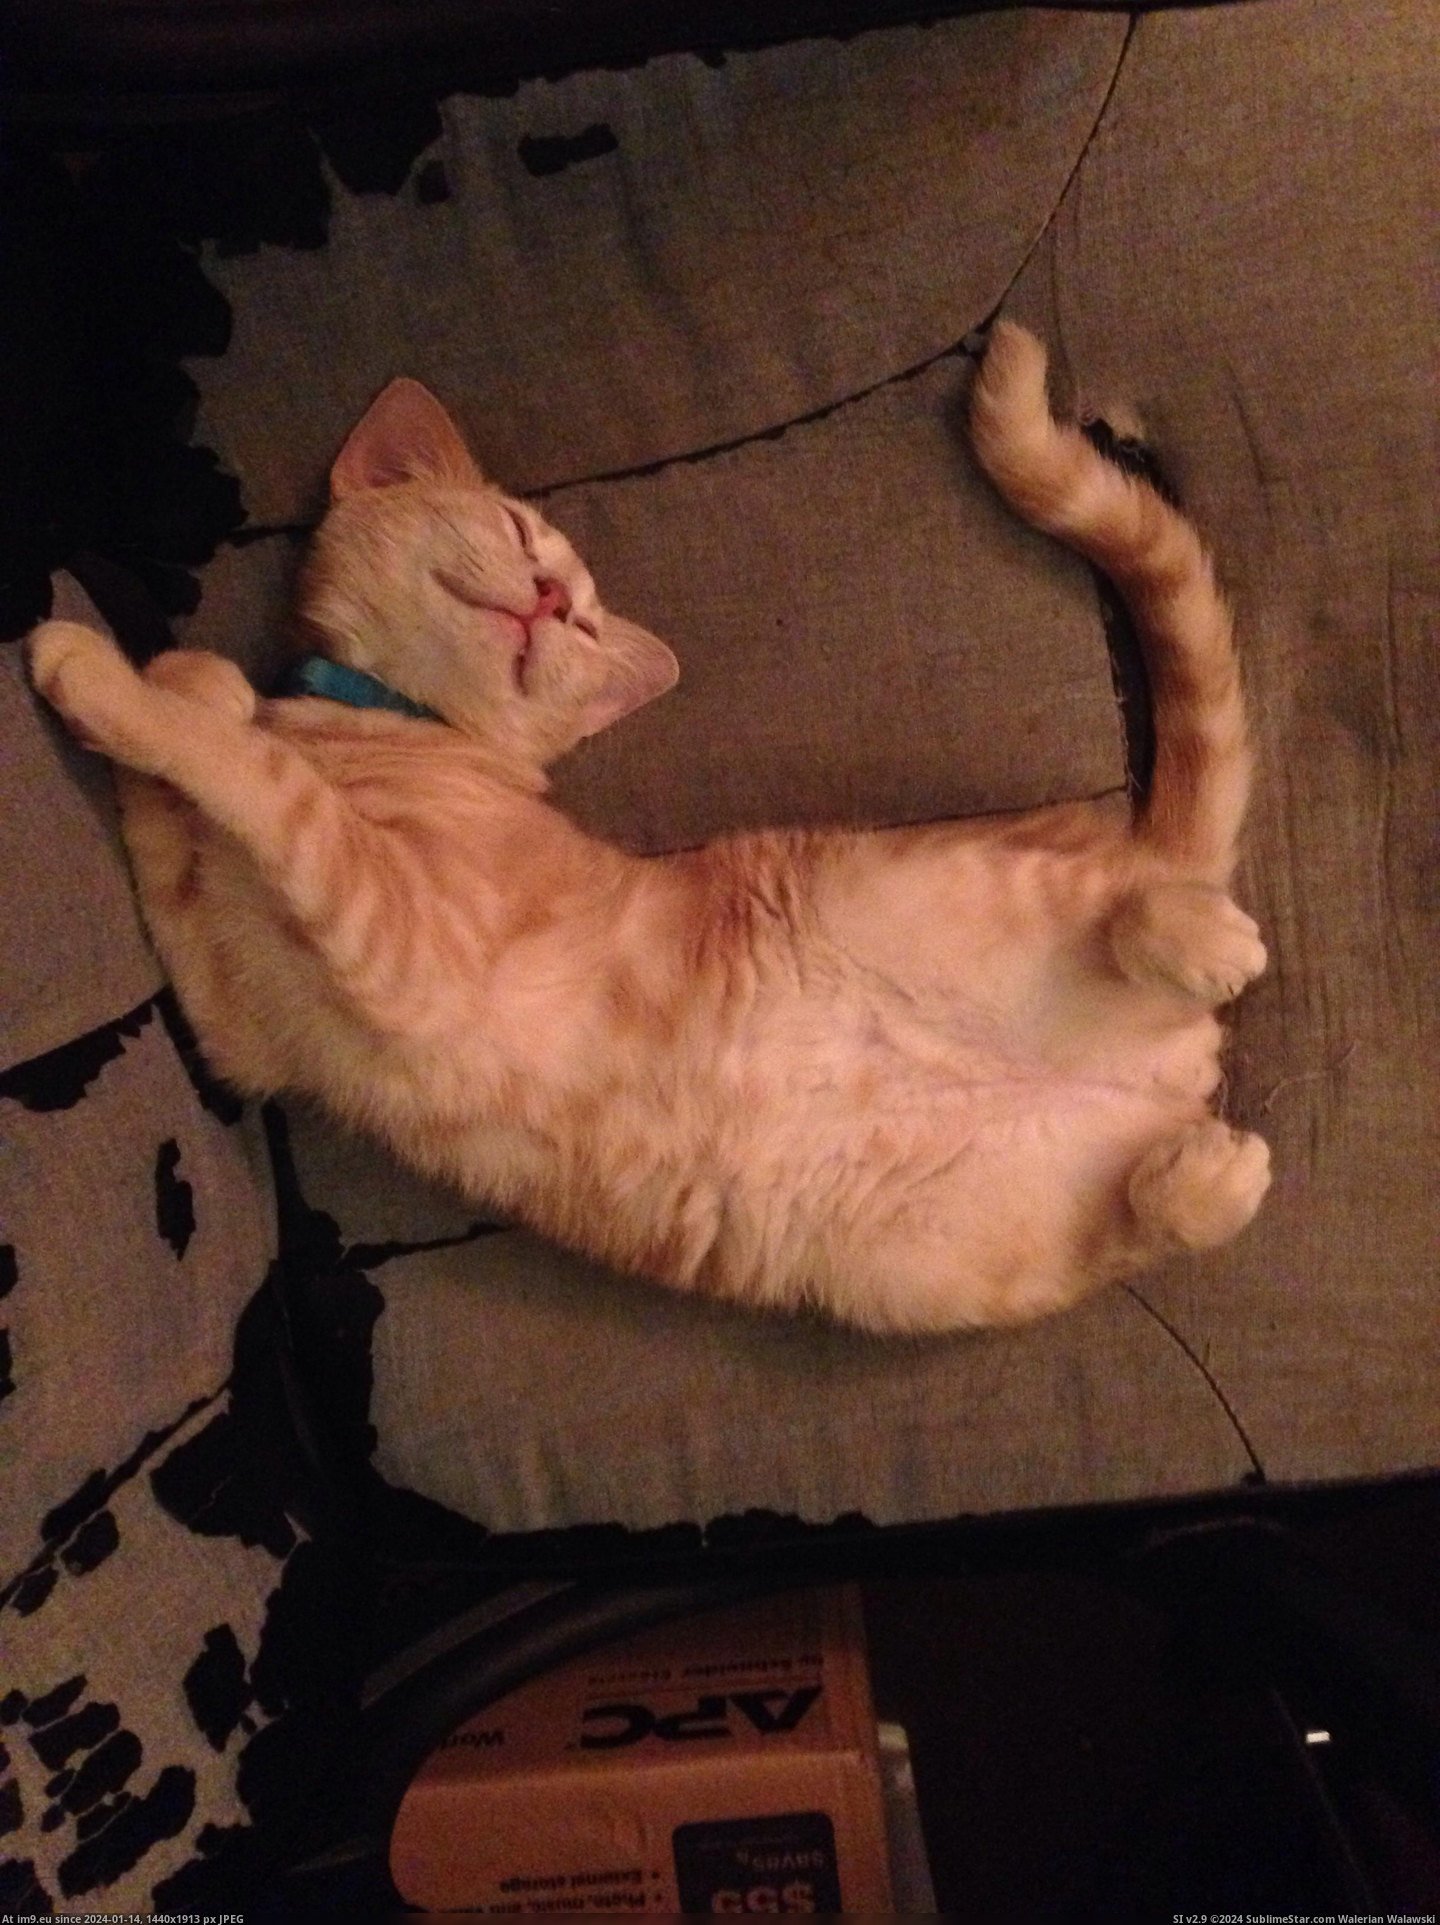 #Boy #How #Note #Curled #Toes #Our #Sleeps [Aww] This is how our little boy sleeps. Note the curled toes. Pic. (Image of album My r/AWW favs))